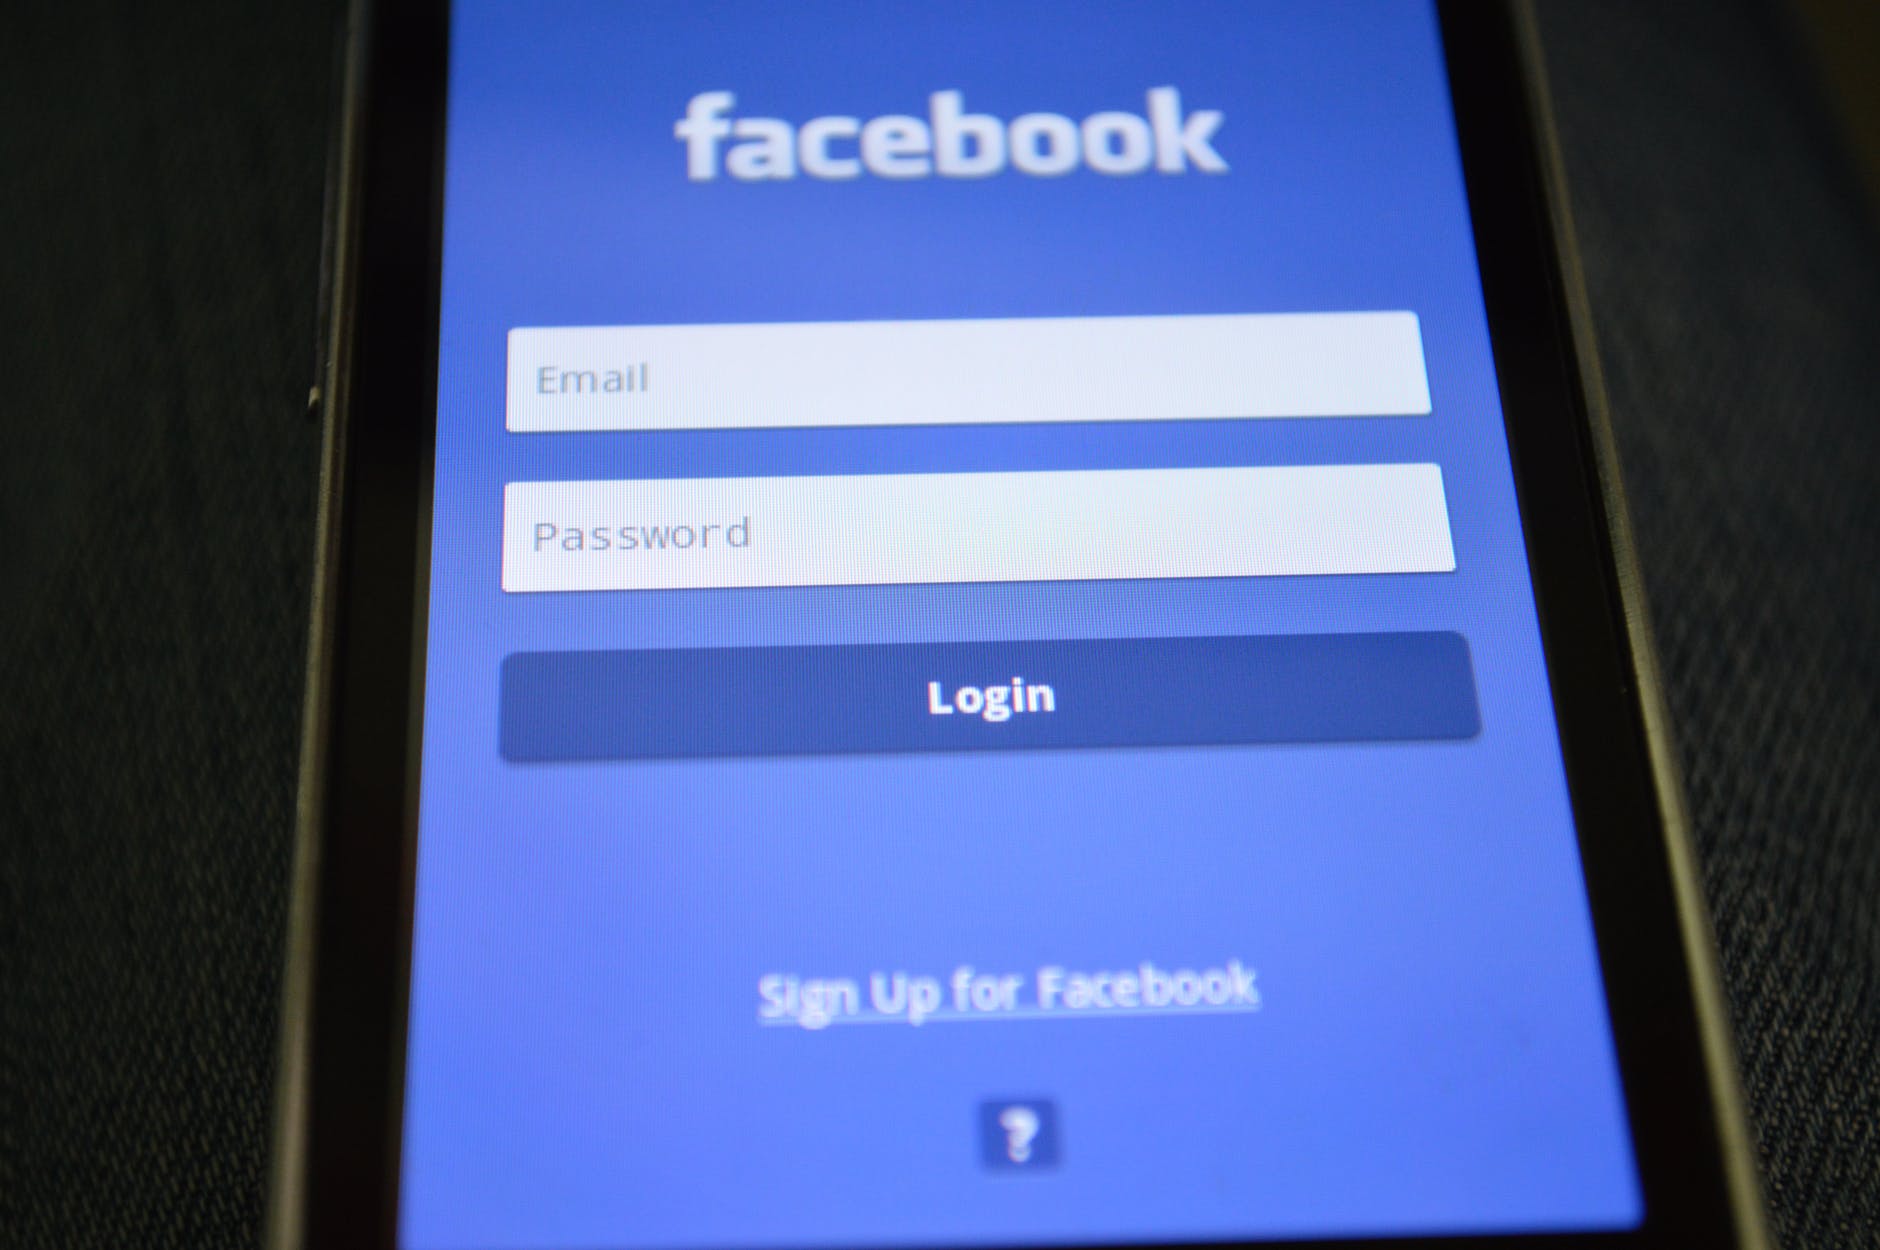 Multi-profile accounts may soon be available on Facebook